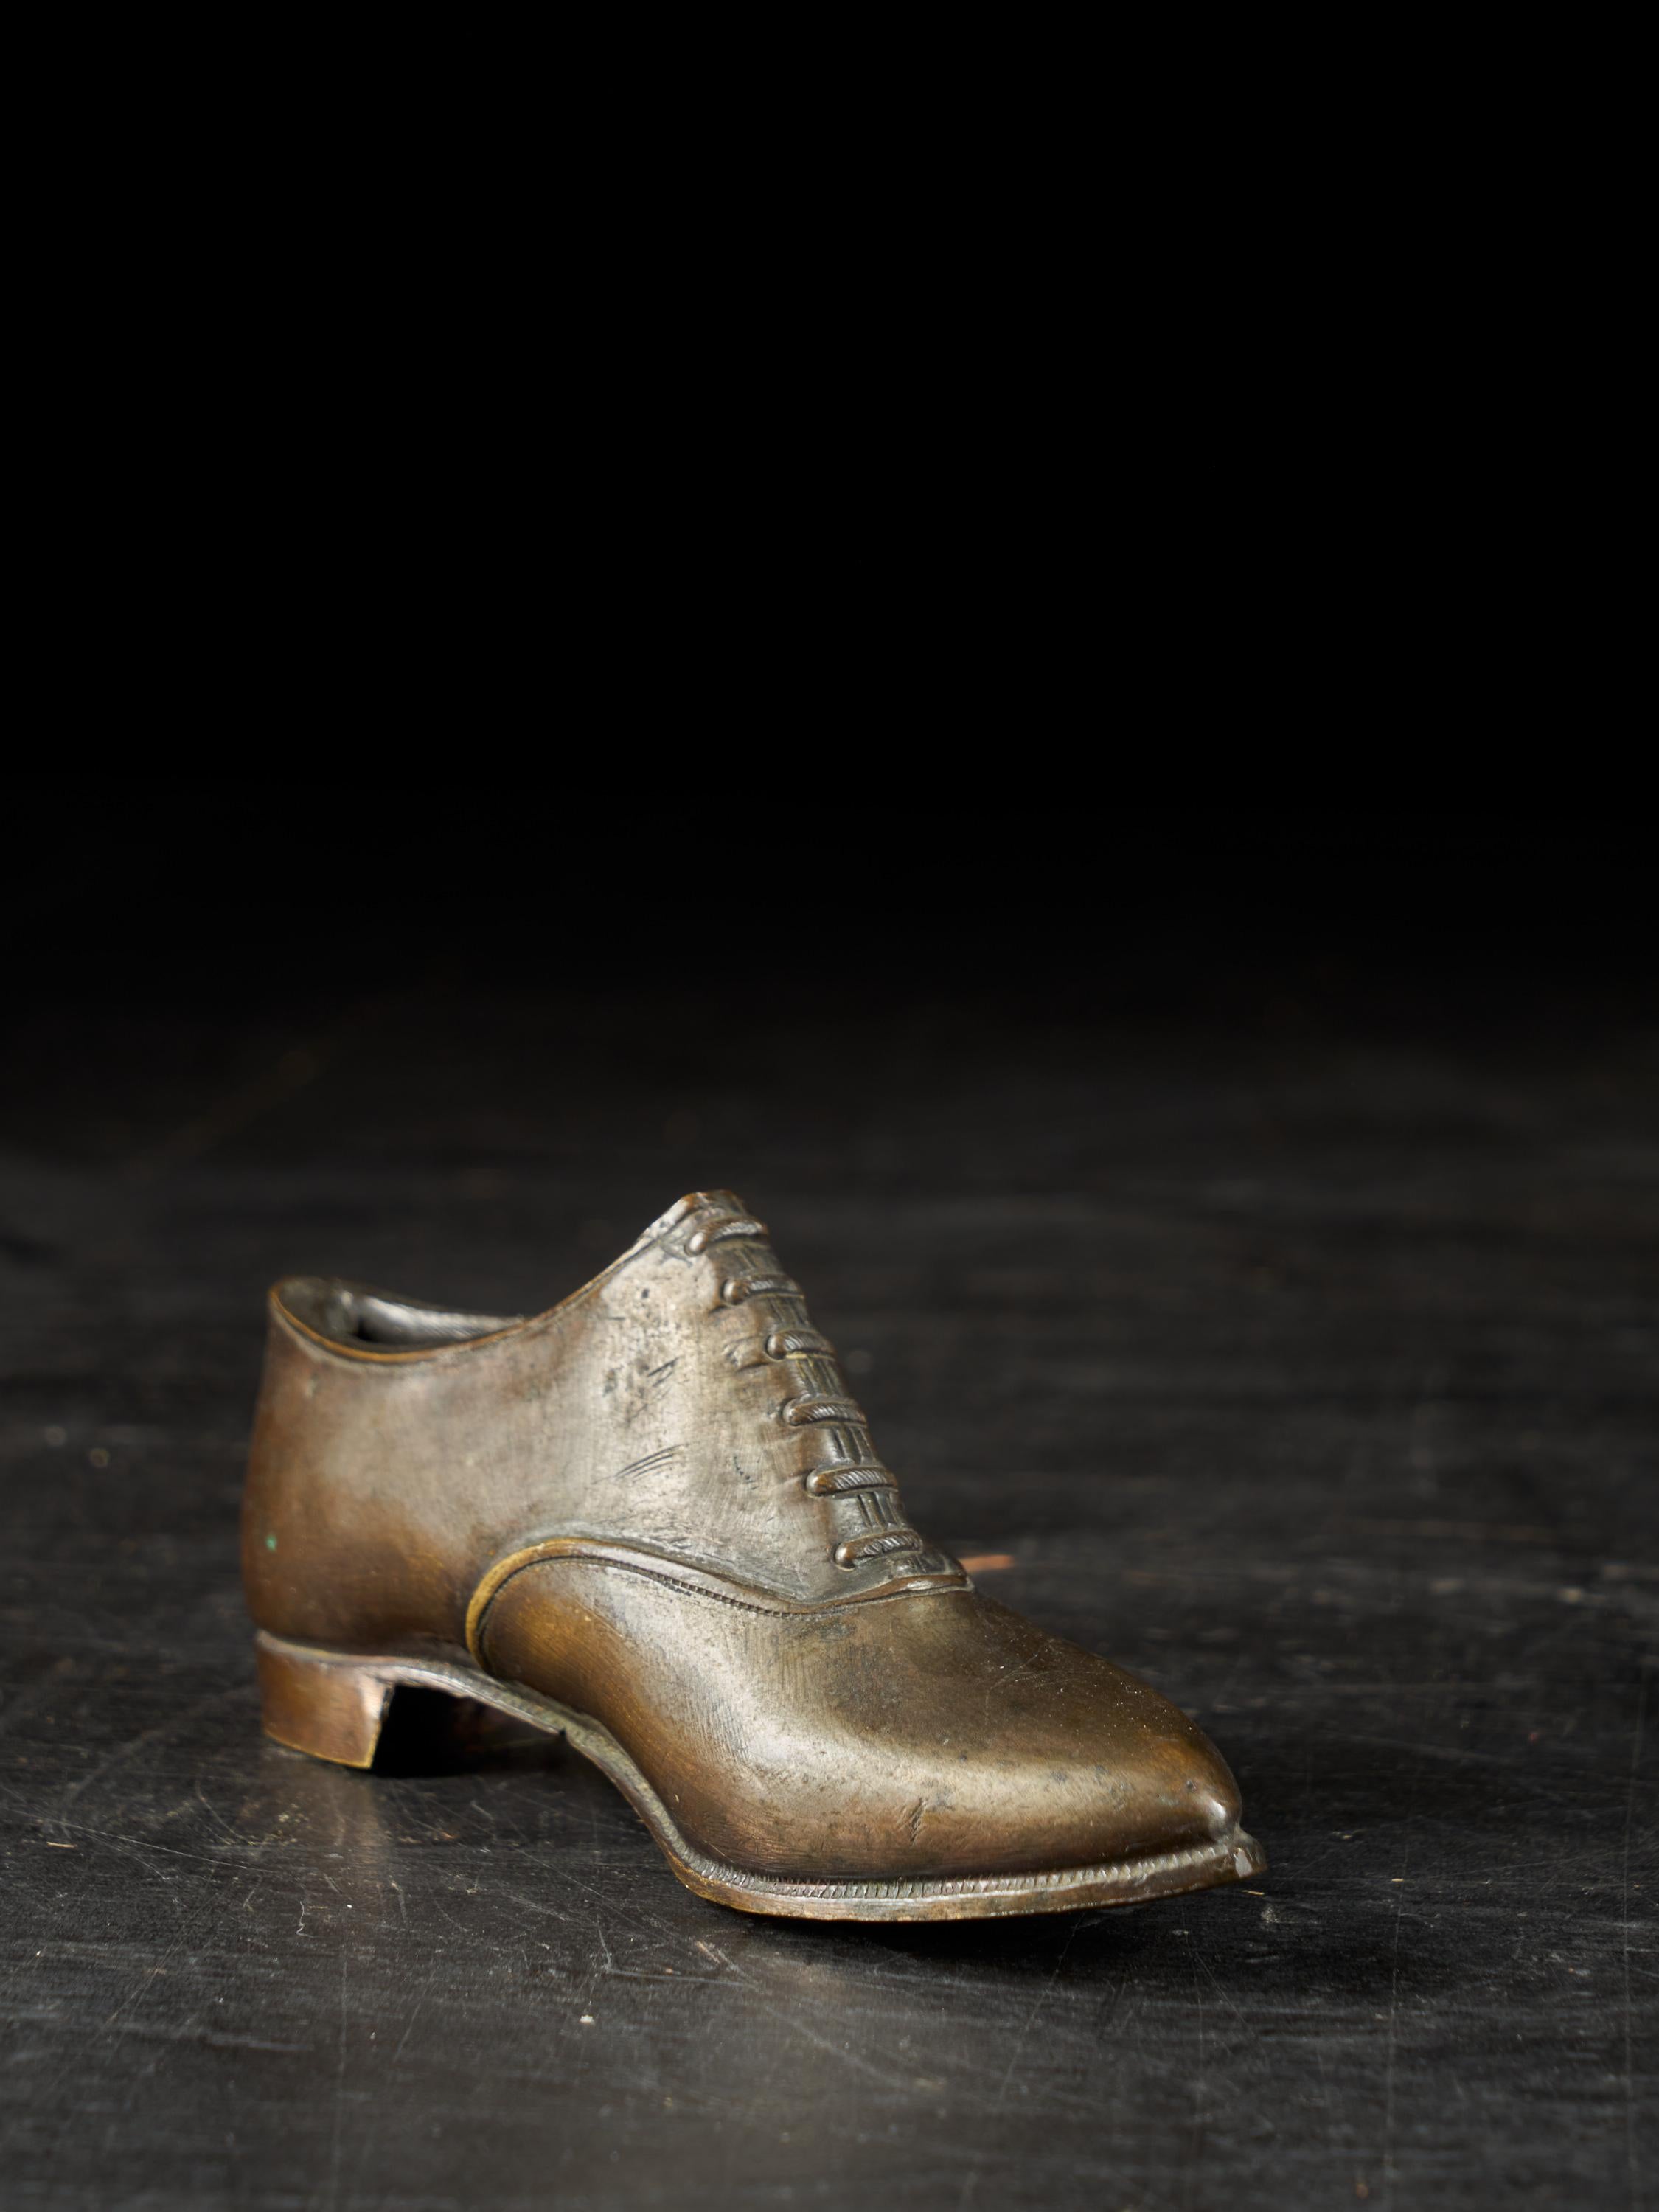 19th century mens shoes